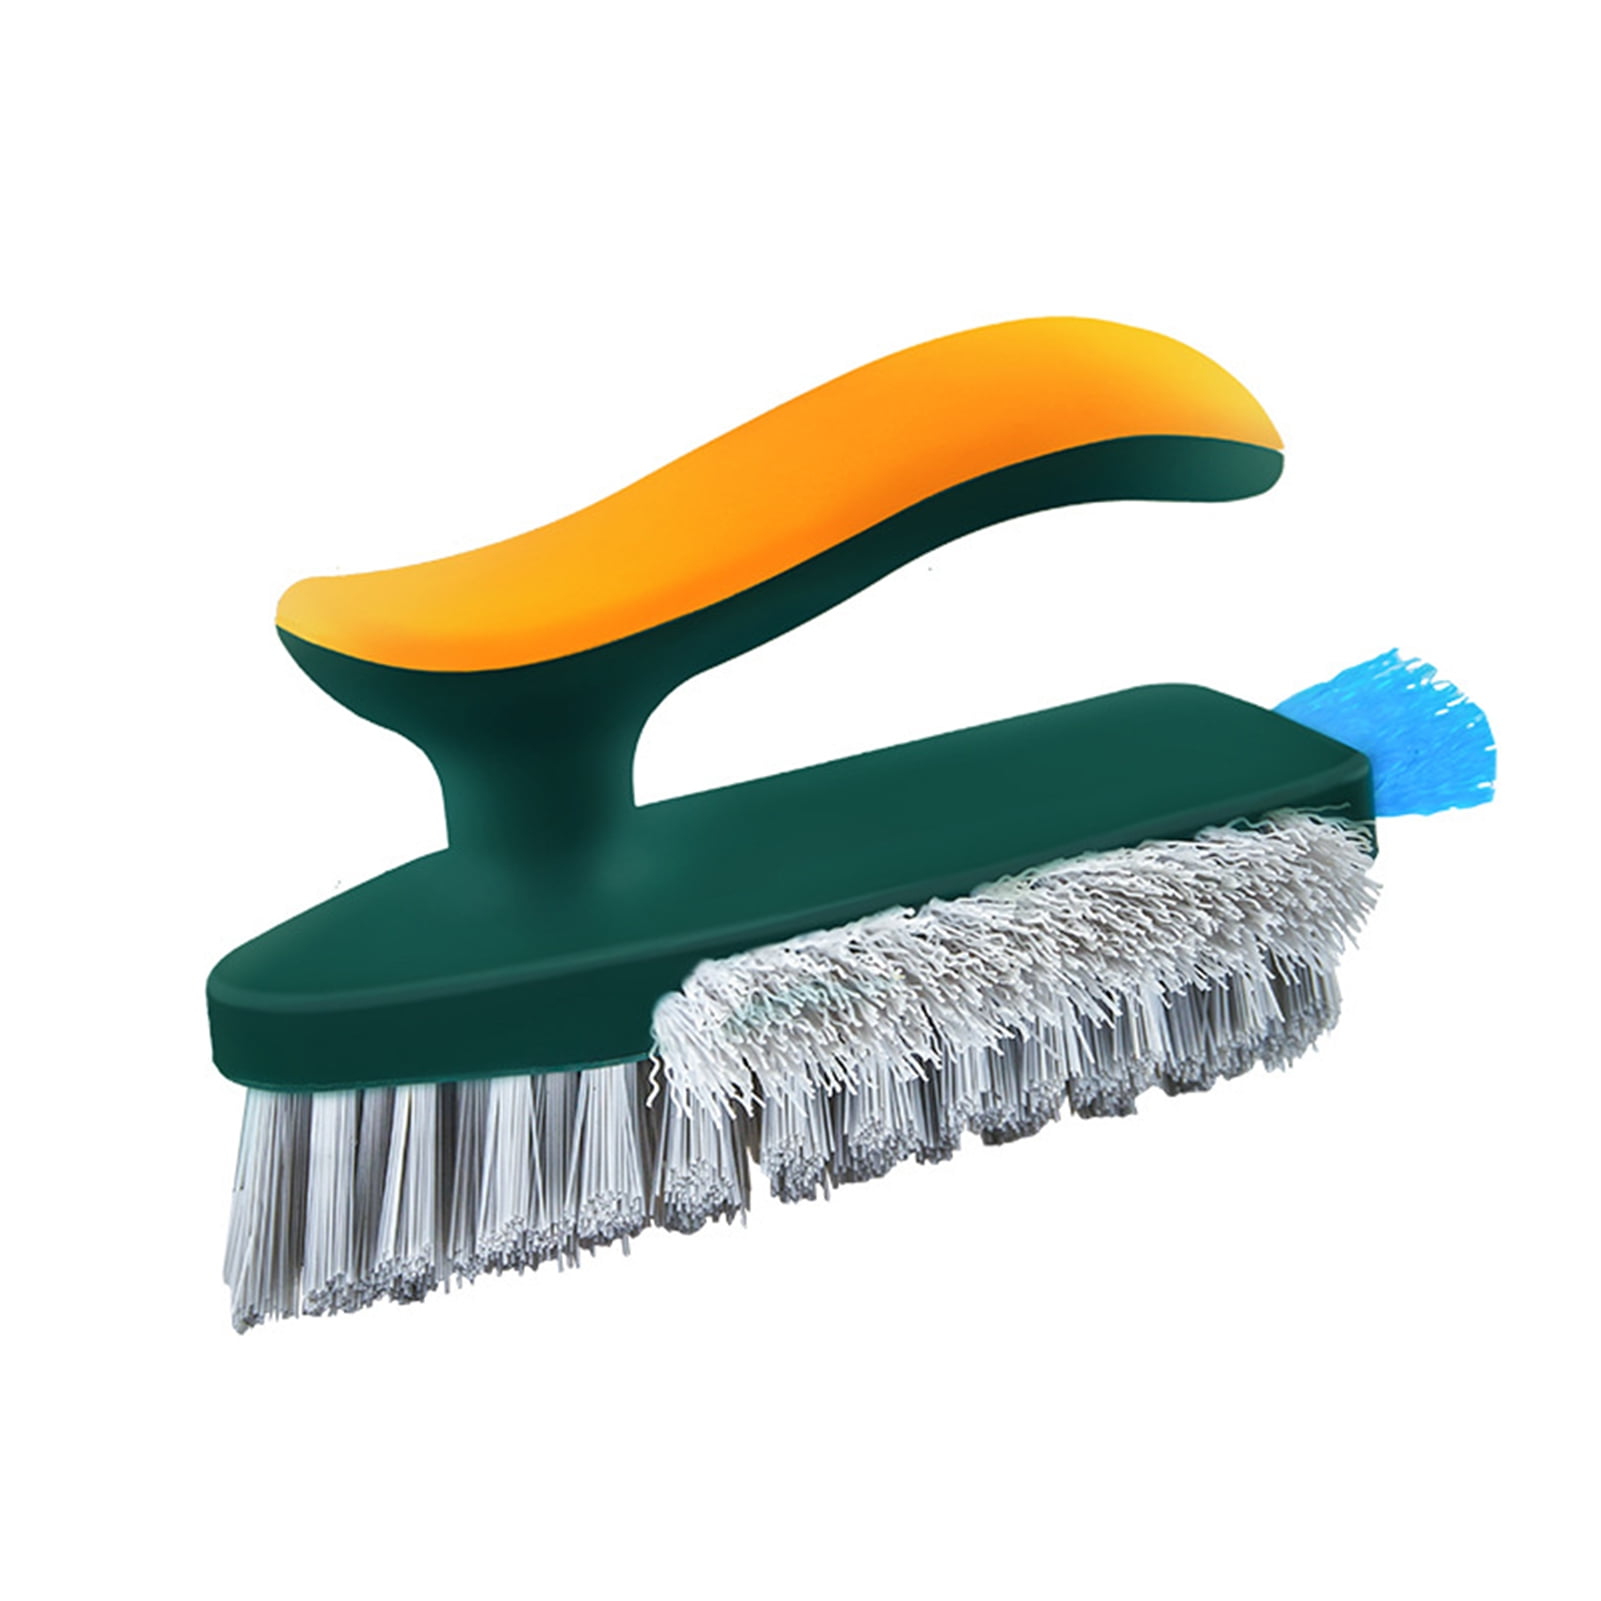 Hard Bristle Recess Crevice Cleaning Brush Household Tools Gap Cleaning  Brush